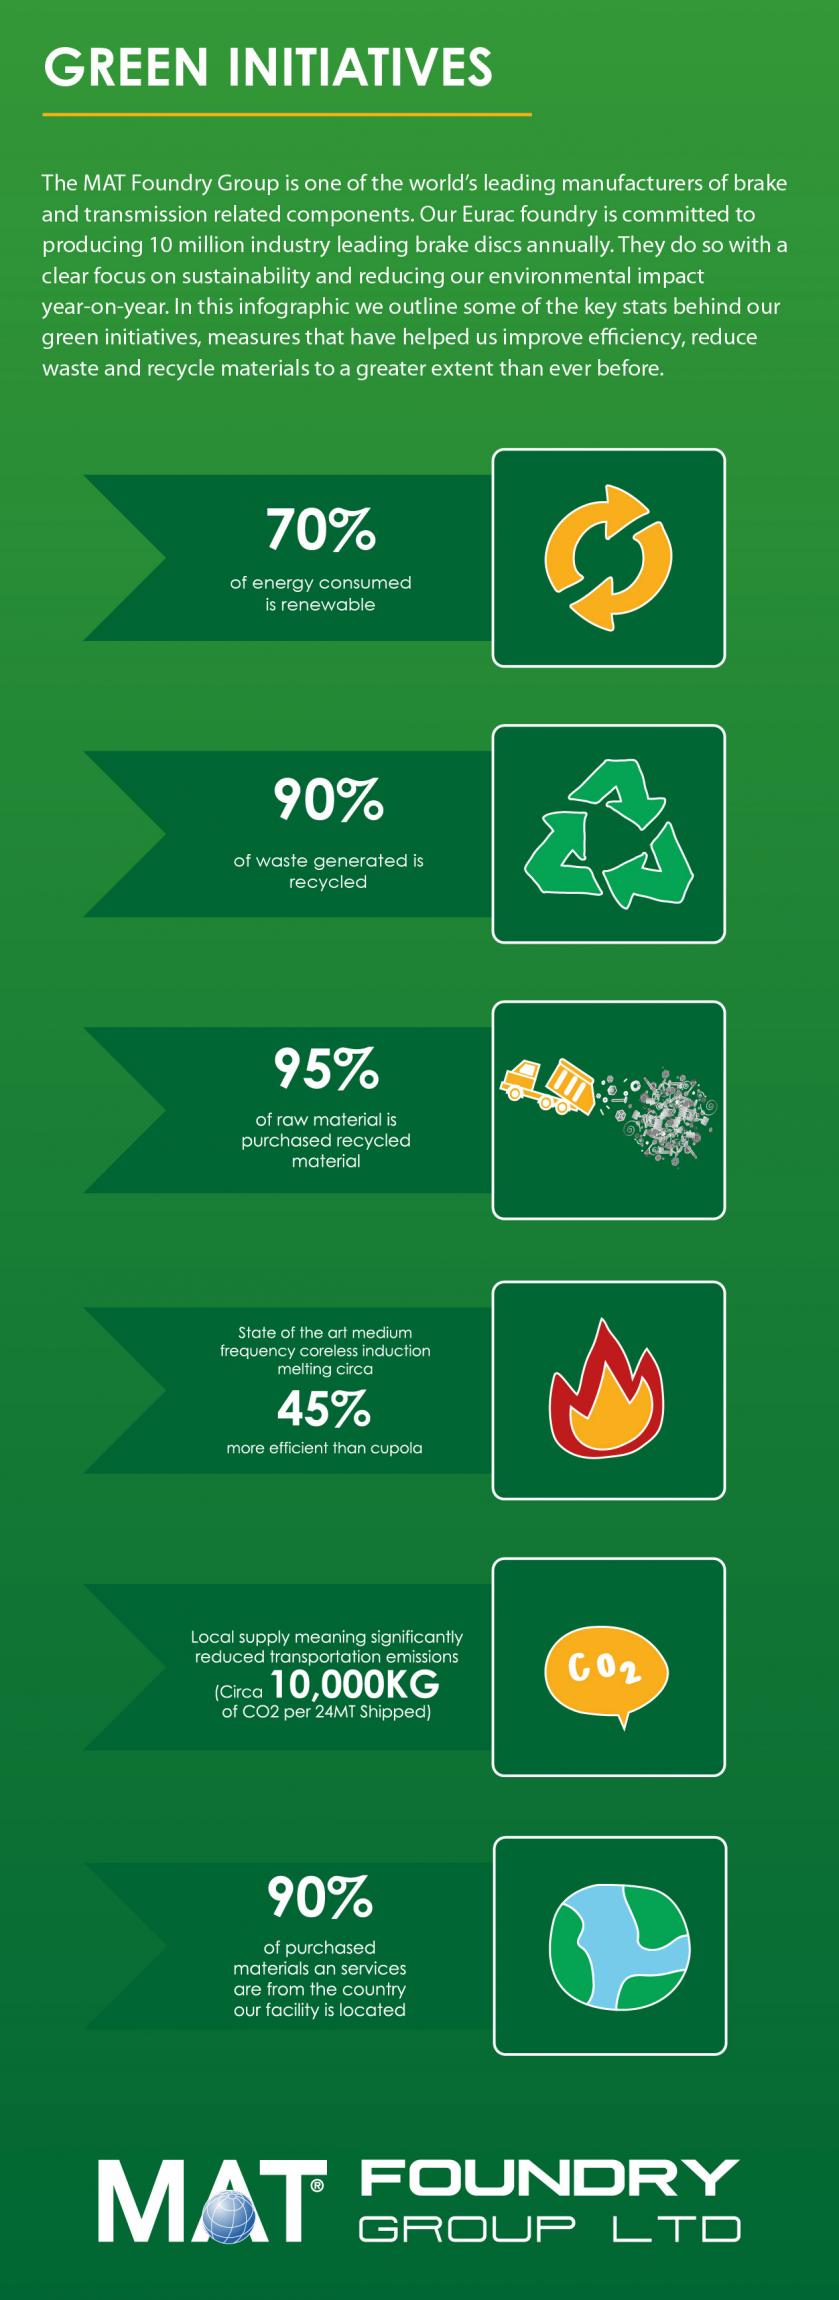 Green Initiatives Infographic - MAT Foundry